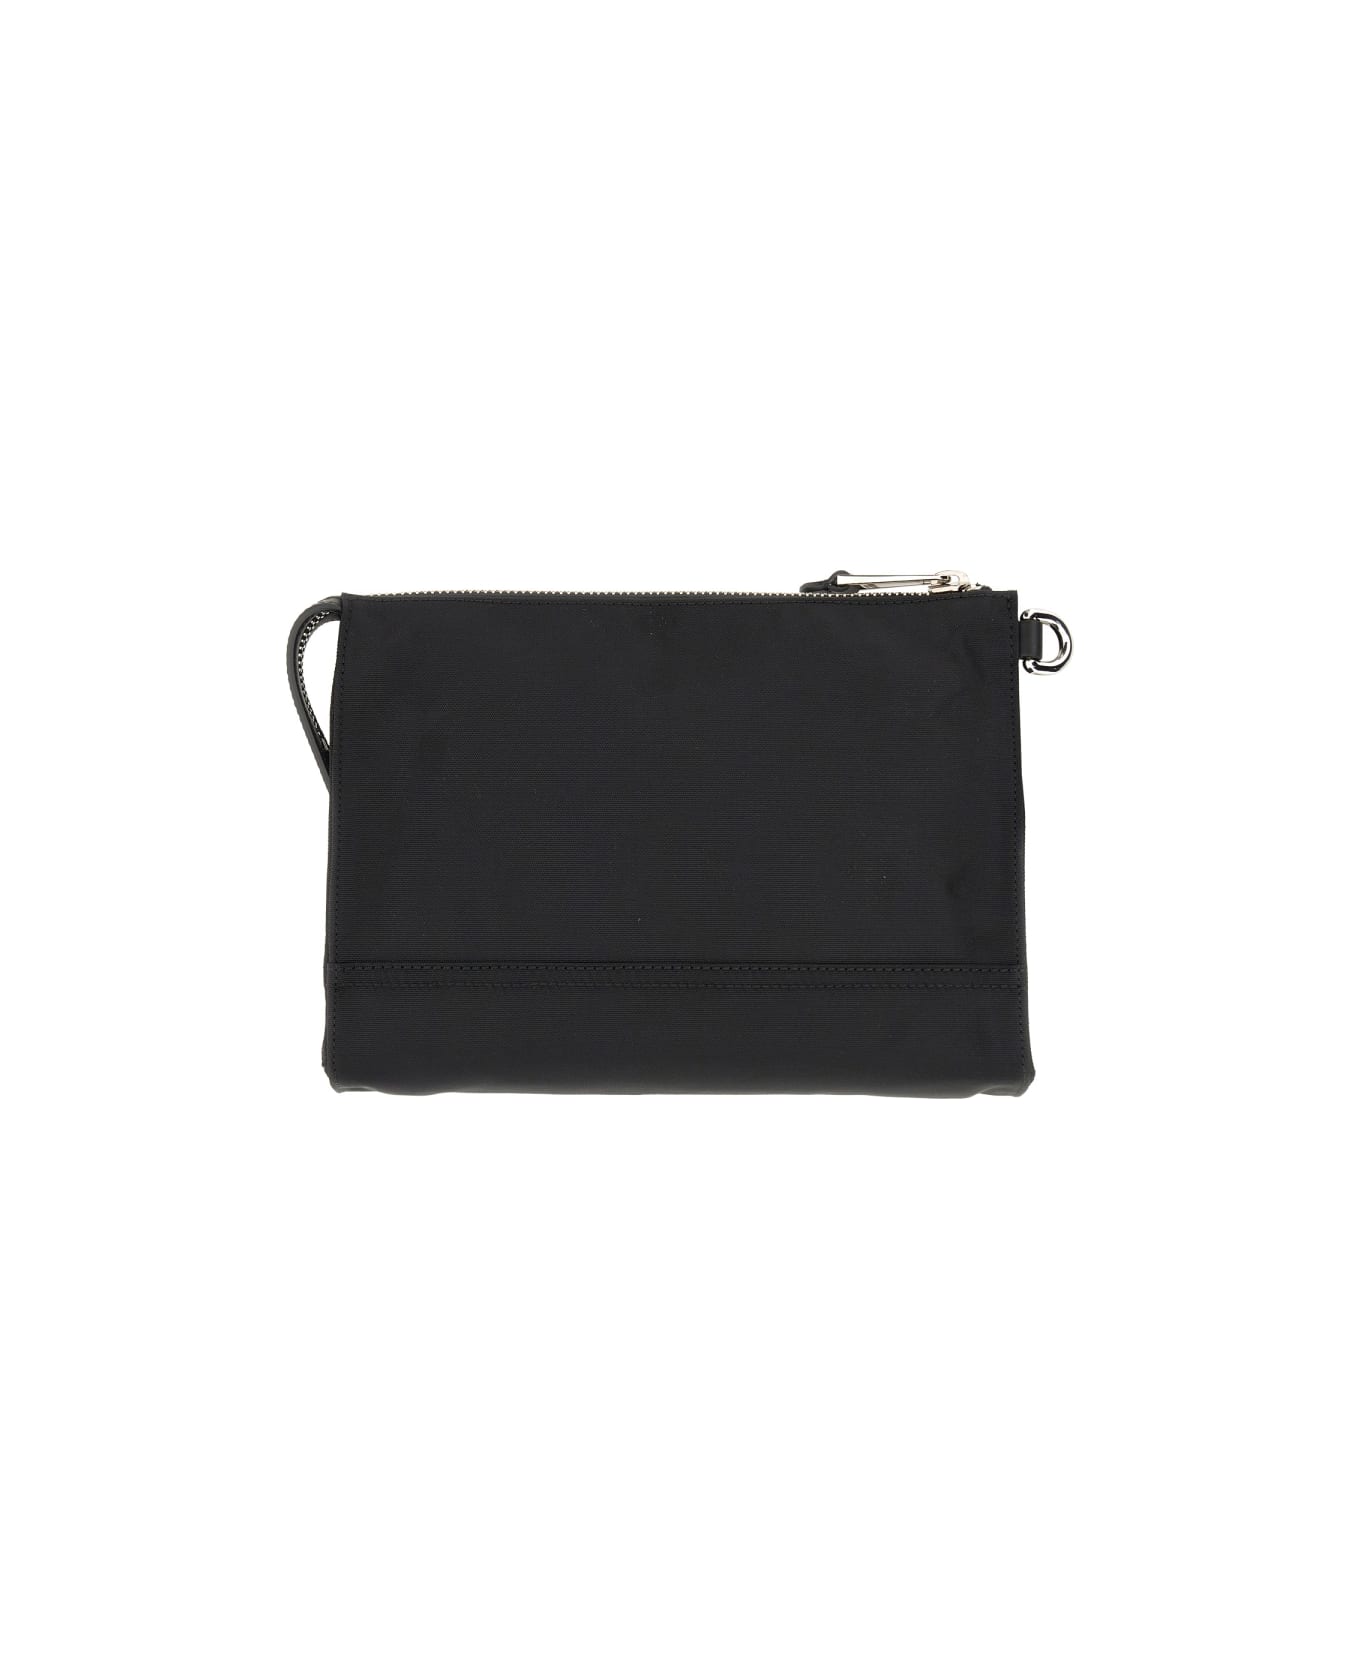 Moschino Clutch Bag With Logo - BLACK ショルダーバッグ